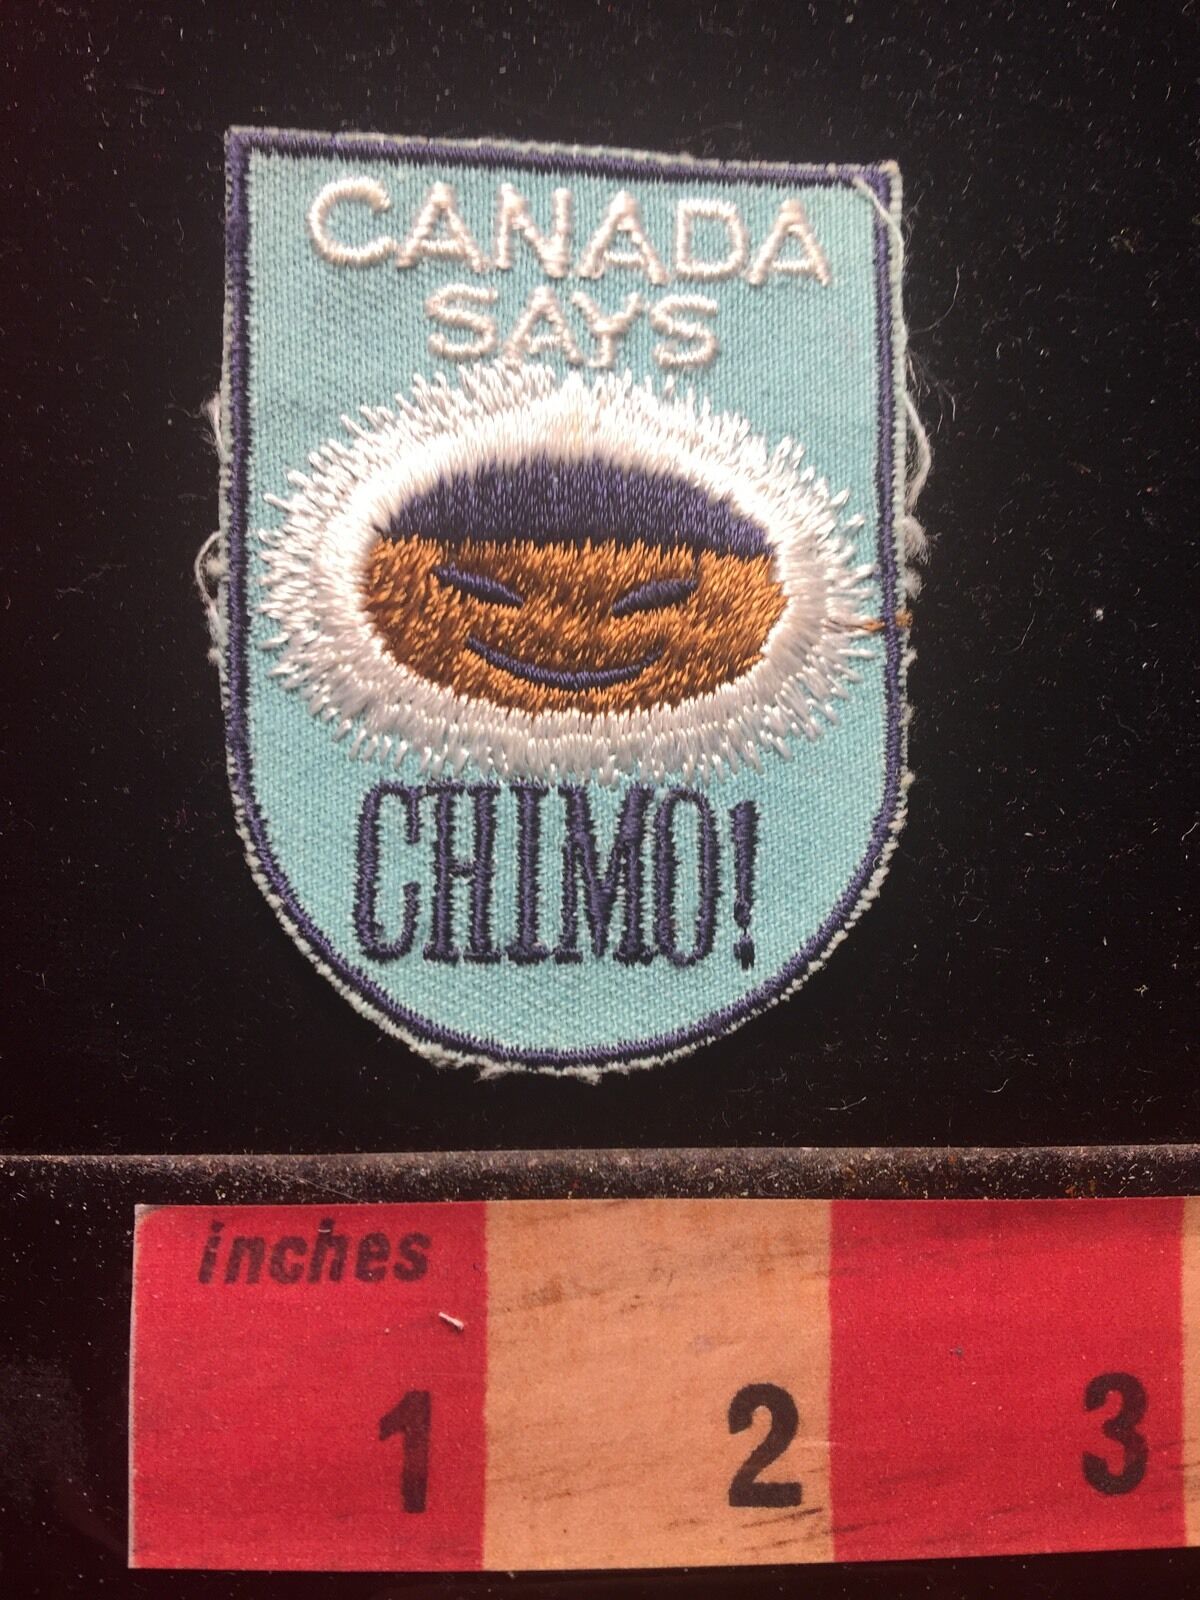 Vtg Souvenir CANADA SAYS CHIMO Patch (Inuktitut Greeting Kinda Like Hello) 68F2